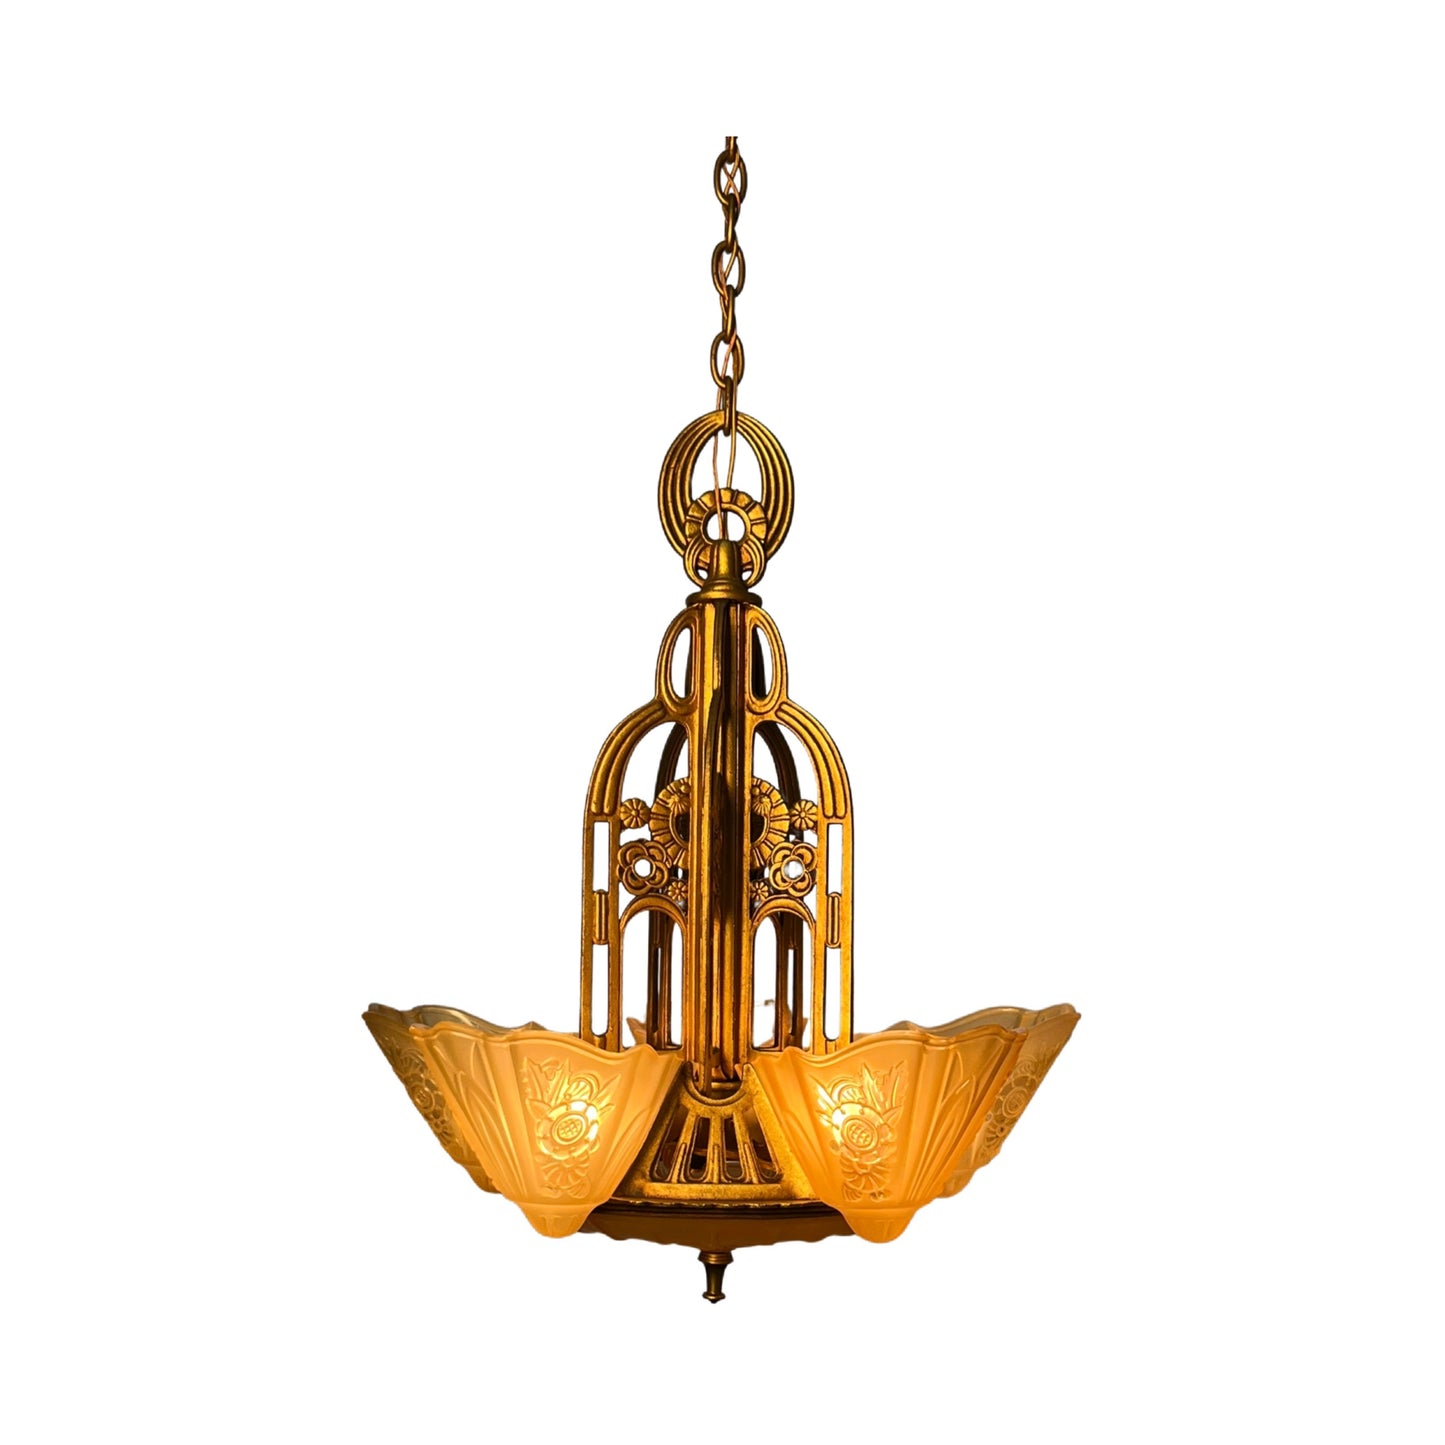 Lightolier “Stylux” for Tall Ceilings, with Original Finish, ca 1934 #2333